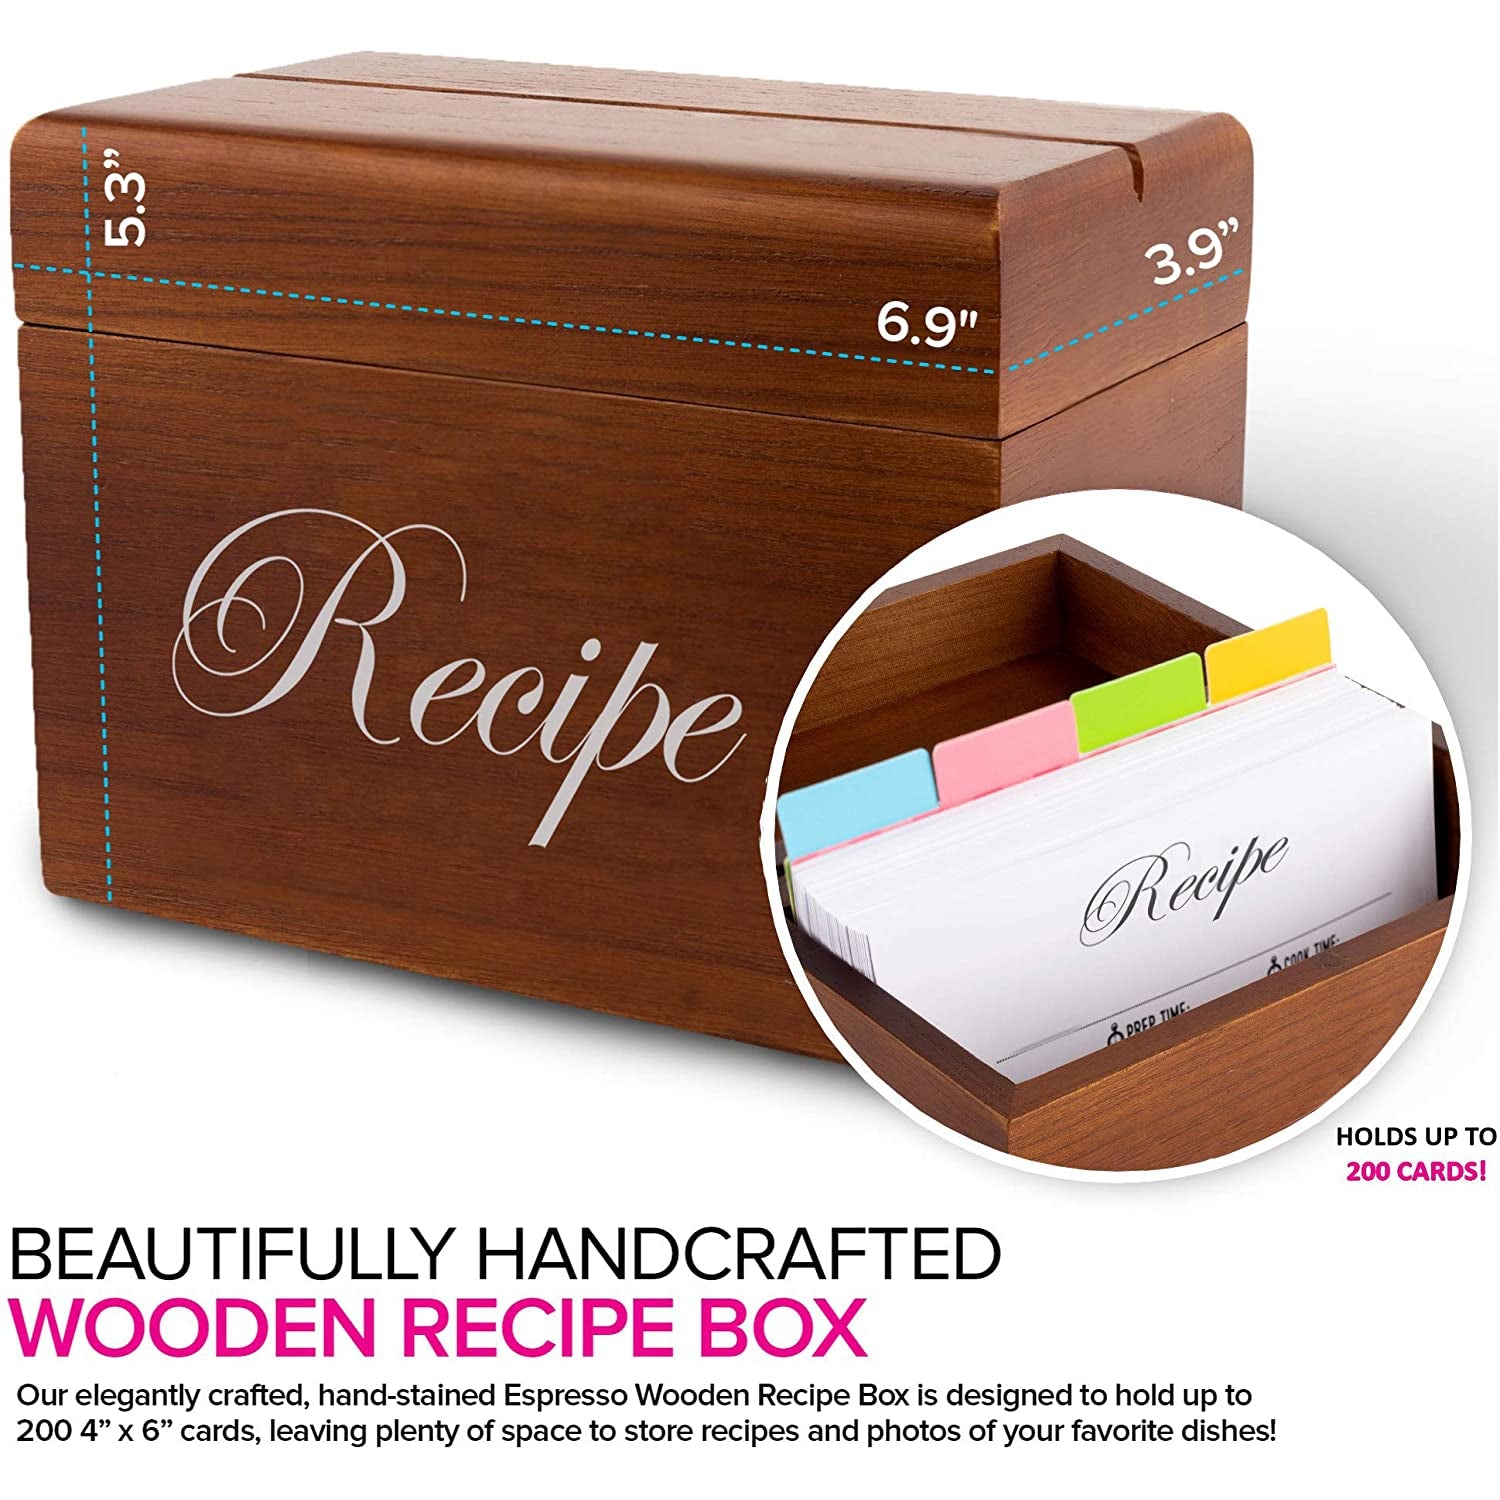 Stock Your Home Hand-Crafted Wooden Recipe Box - 75 Recipe Cards and 8